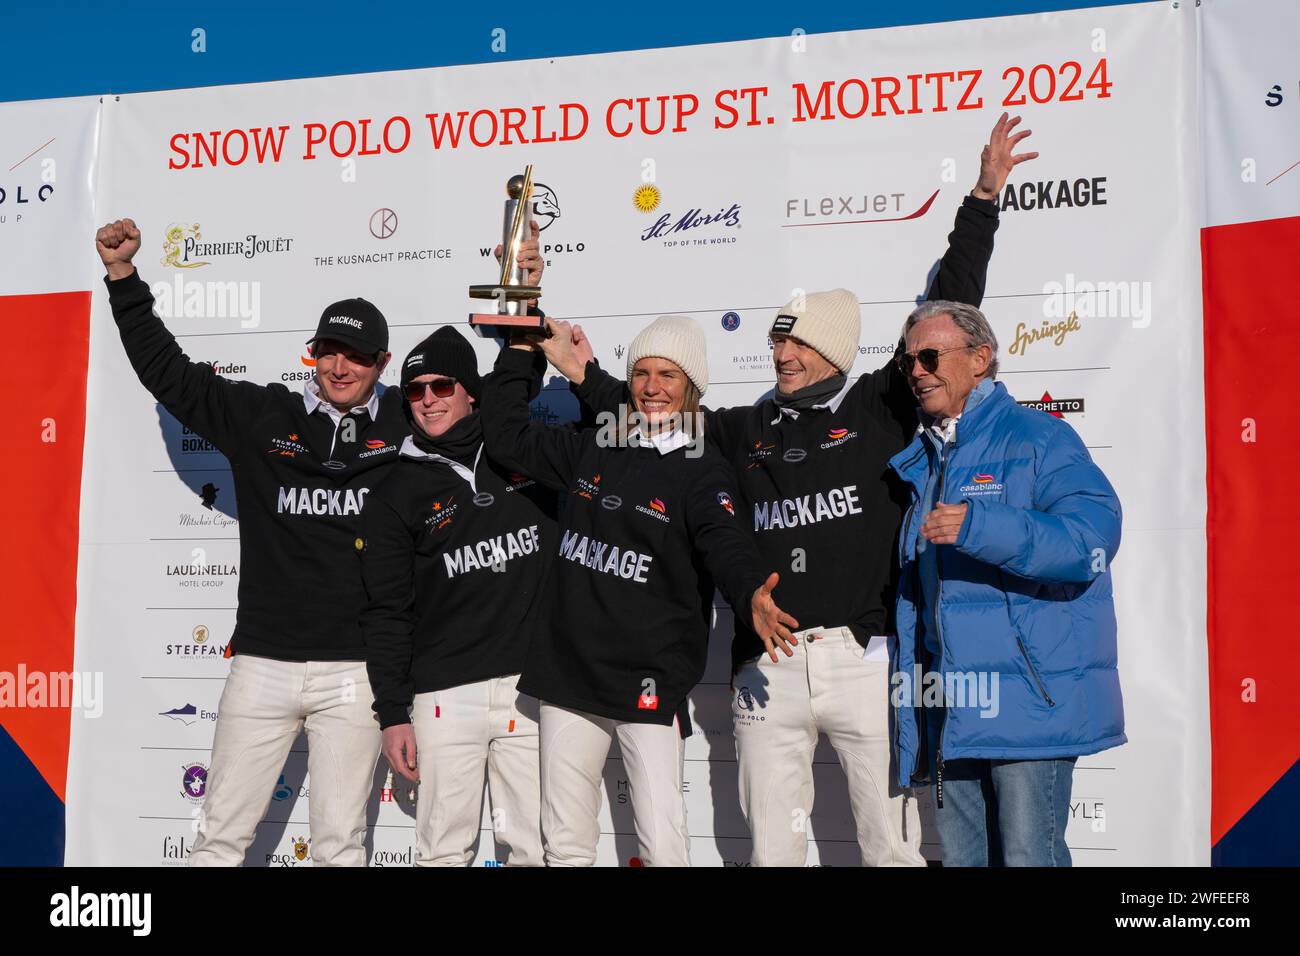 St. Moritz - January 28, 2024: Game actions and awards ceremony at the Snow Polo World Cup St.Moritz 2024 finals Stock Photo